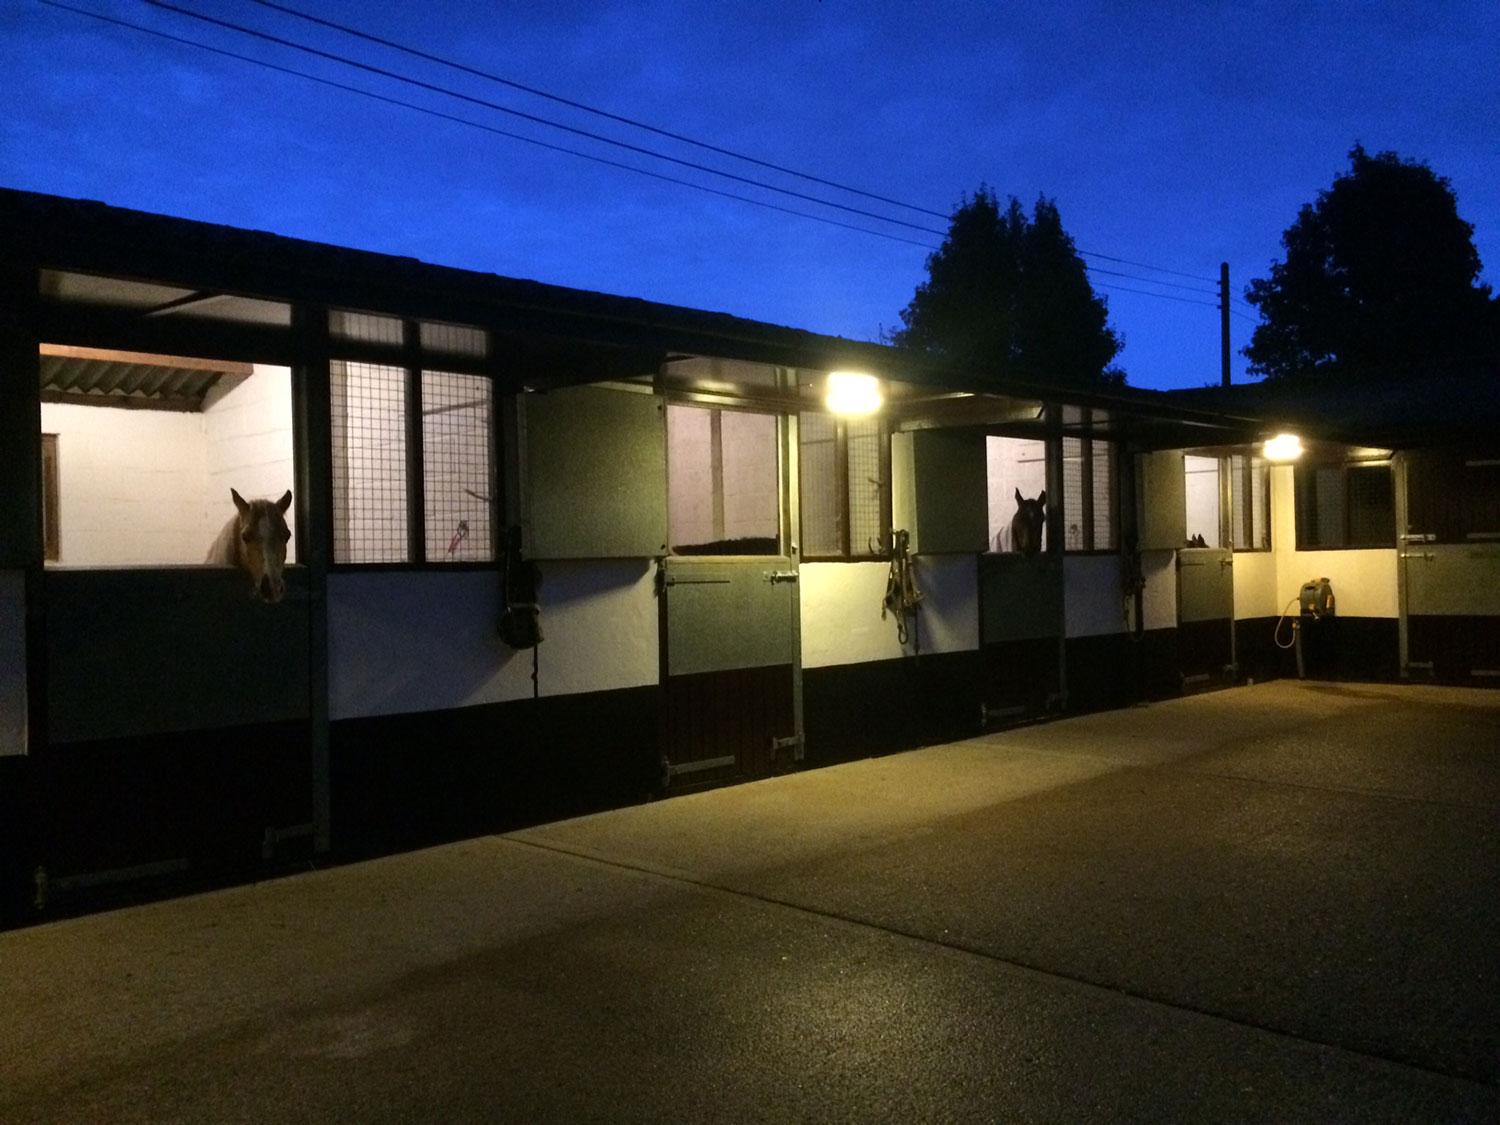 The yard and stables well lit at night